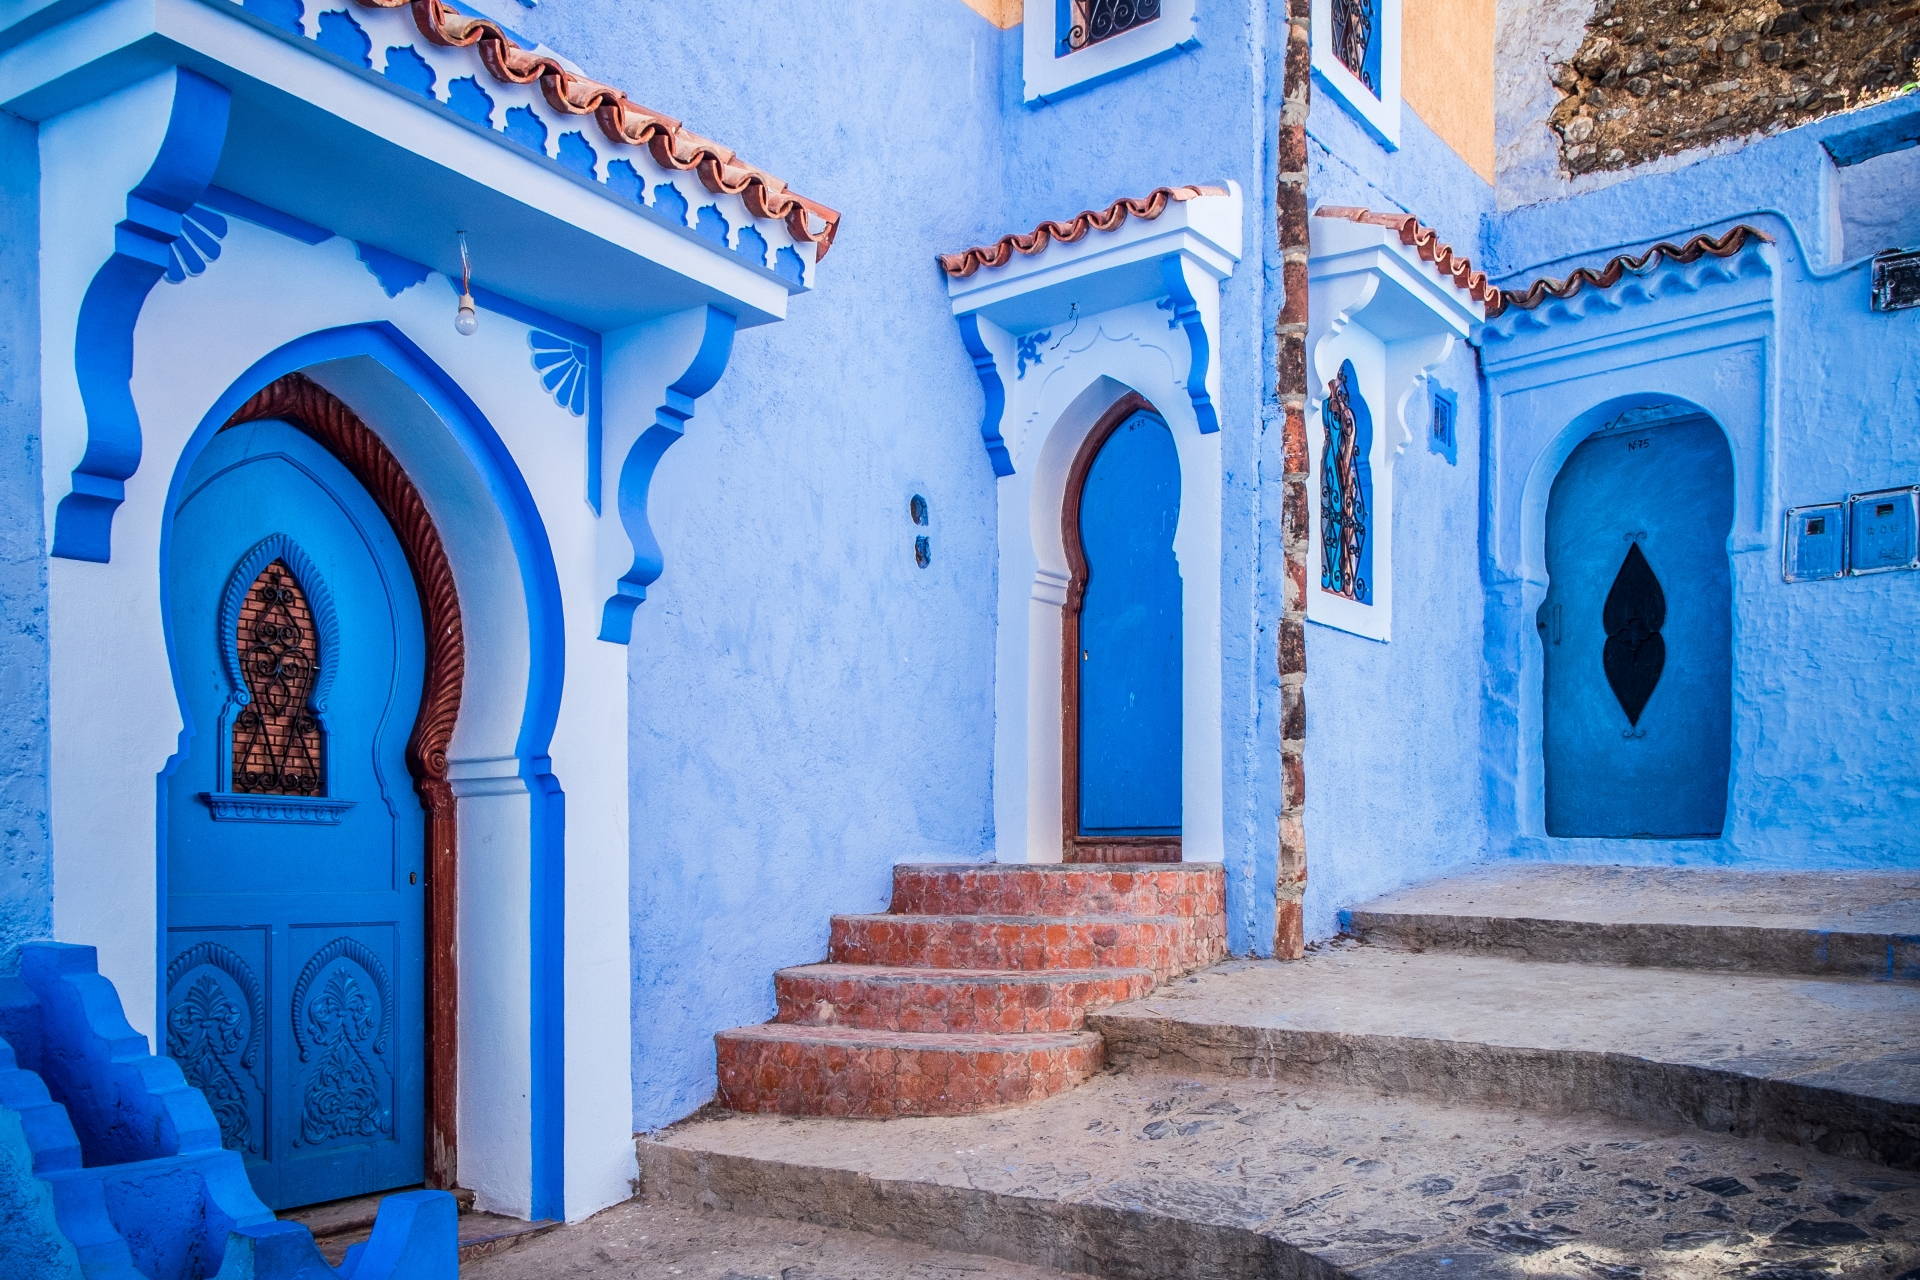 Chefchaouen - Authentic Morocco